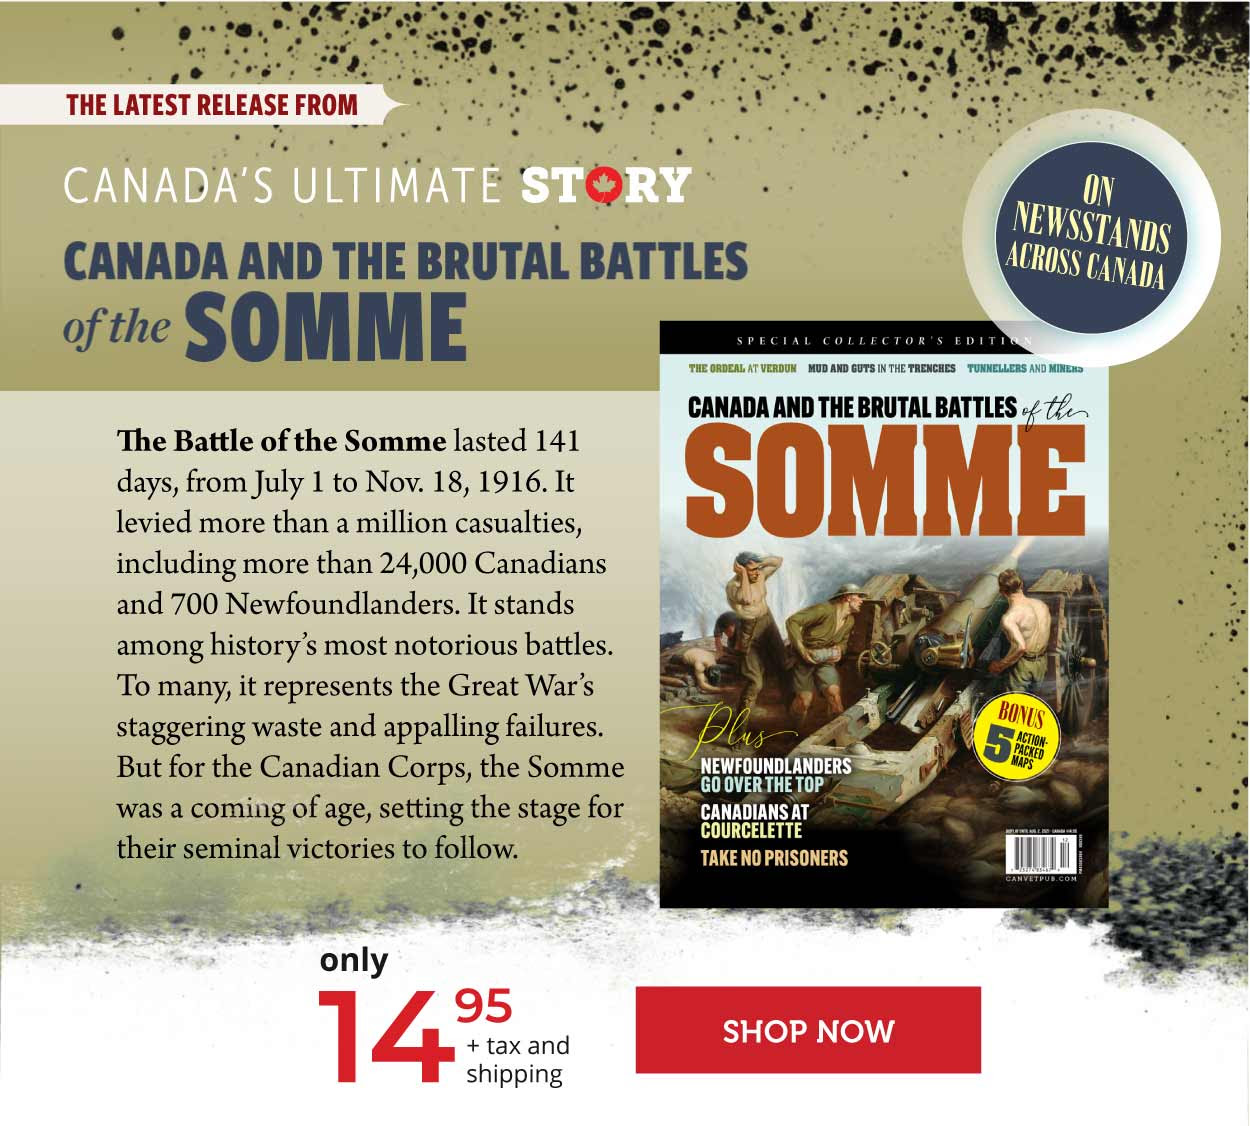 Canada and the brutal battles of the somme